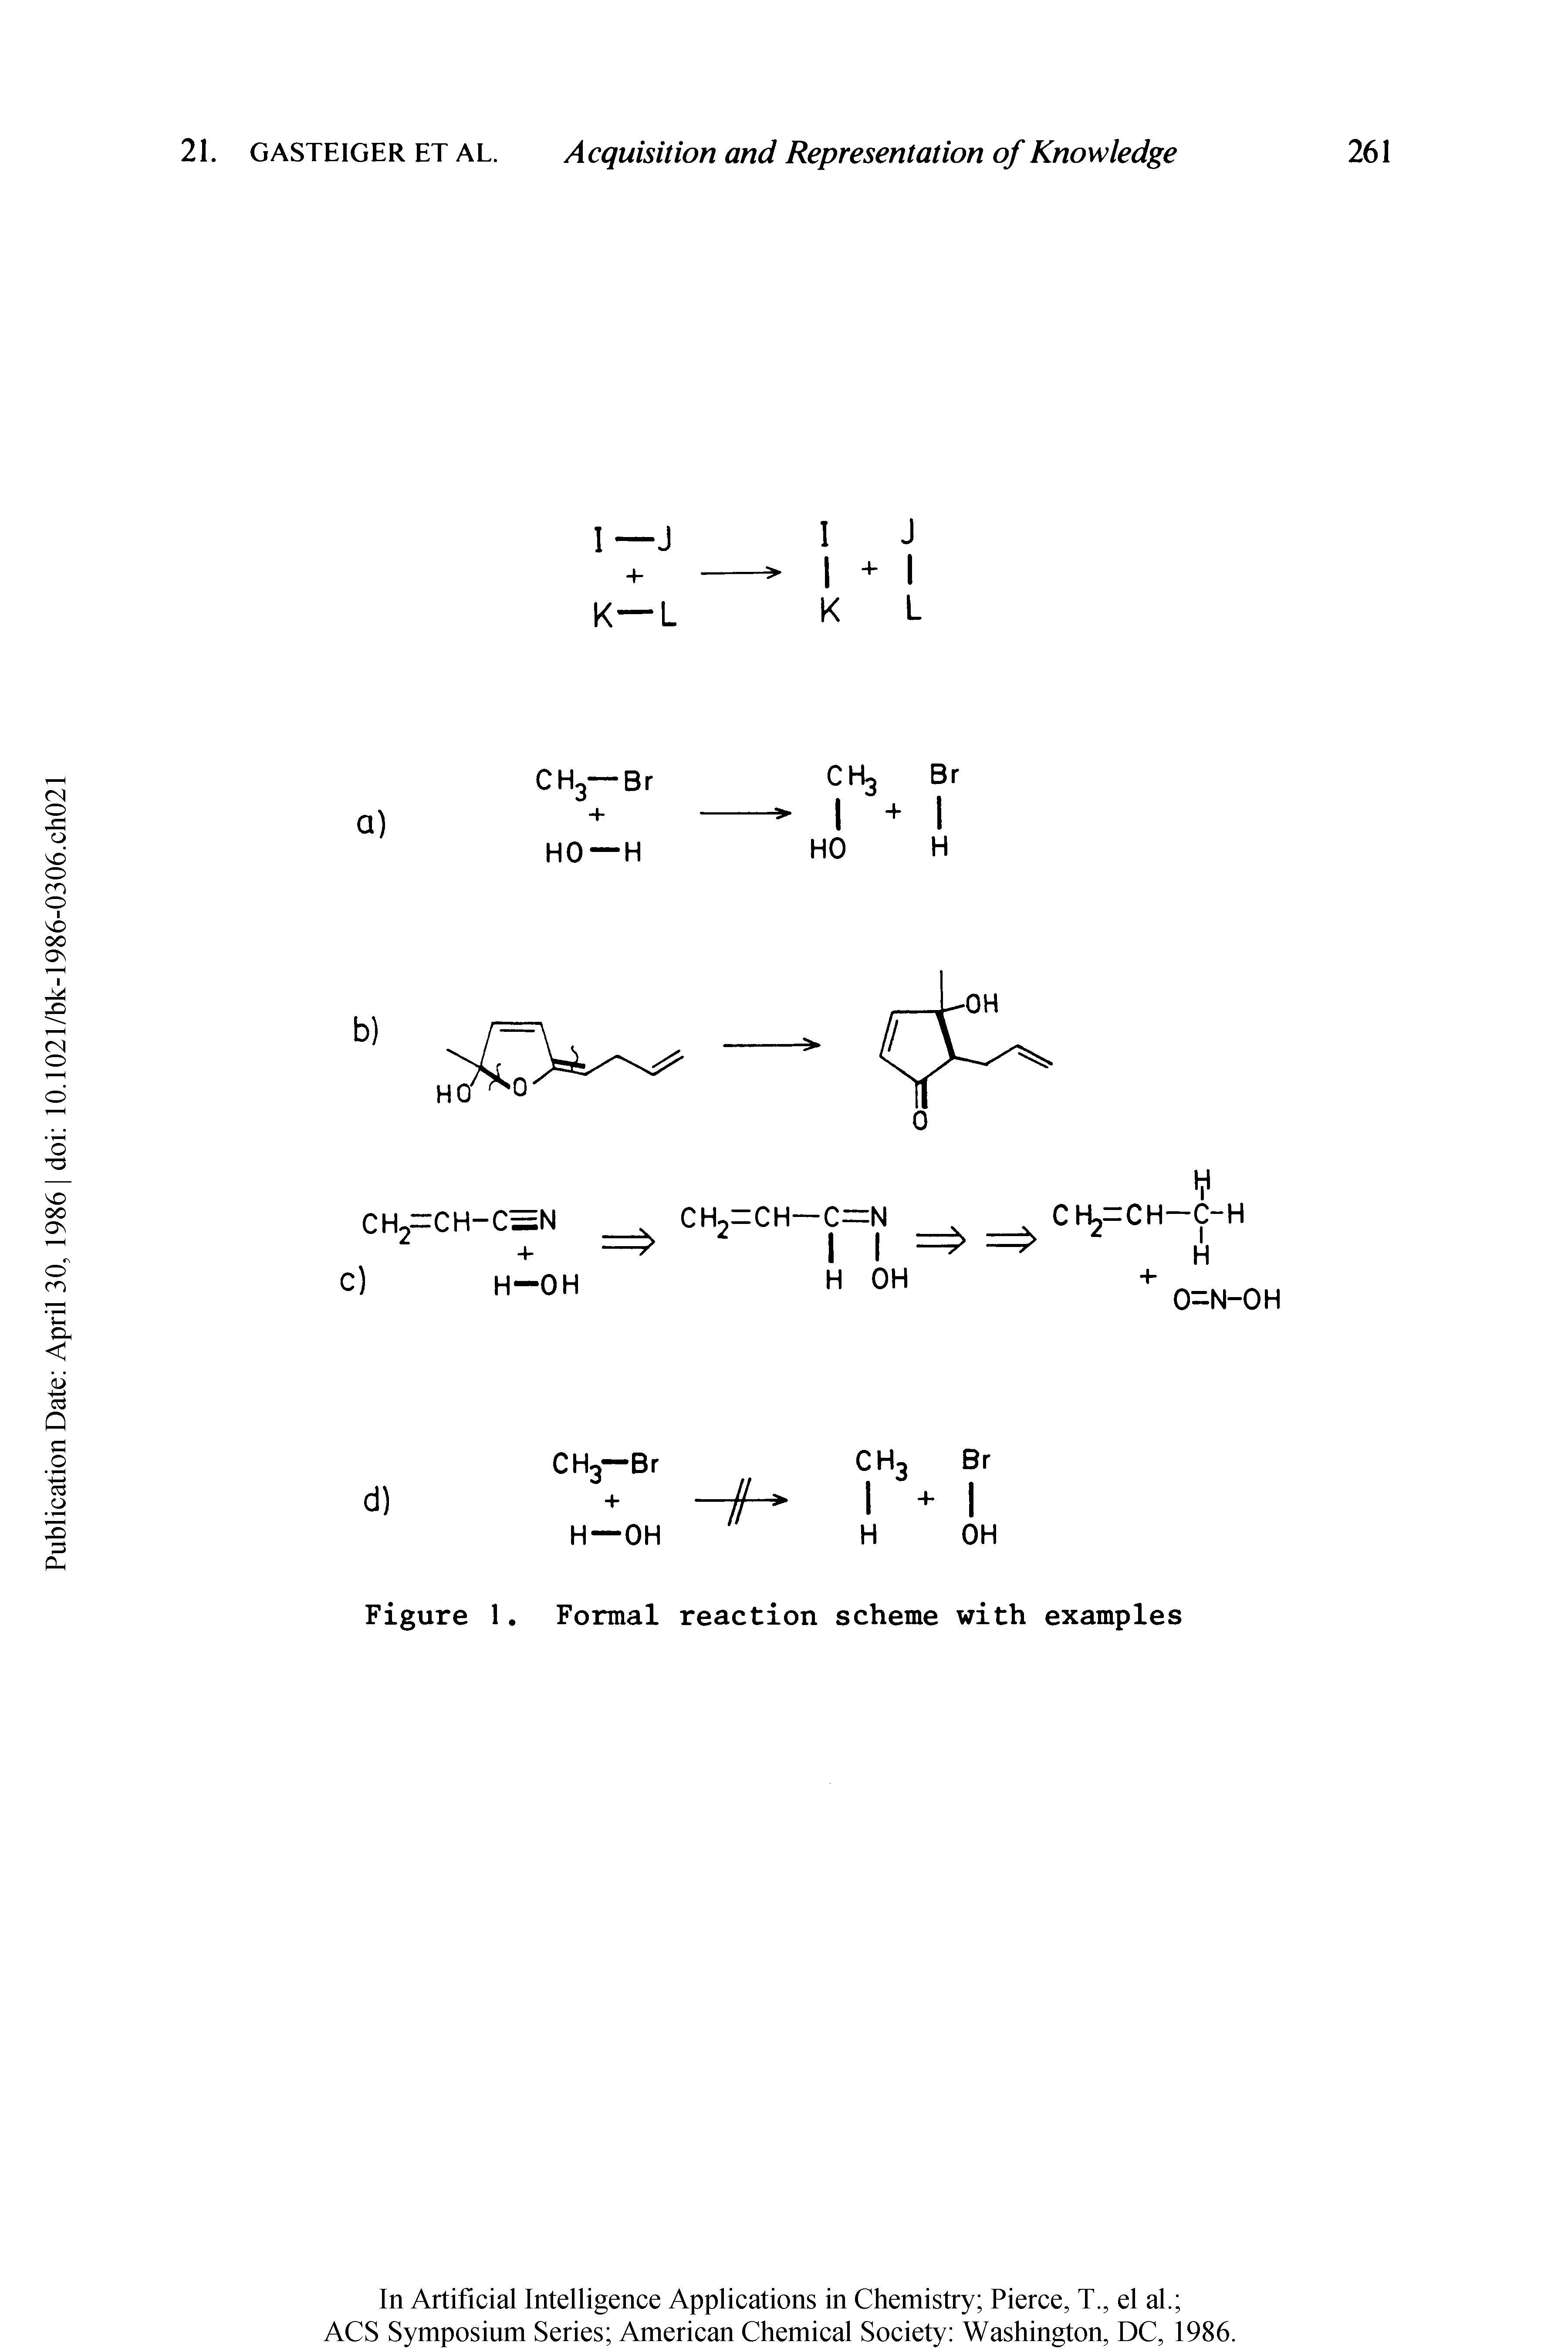 Figure 1. Formal reaction scheme with examples...